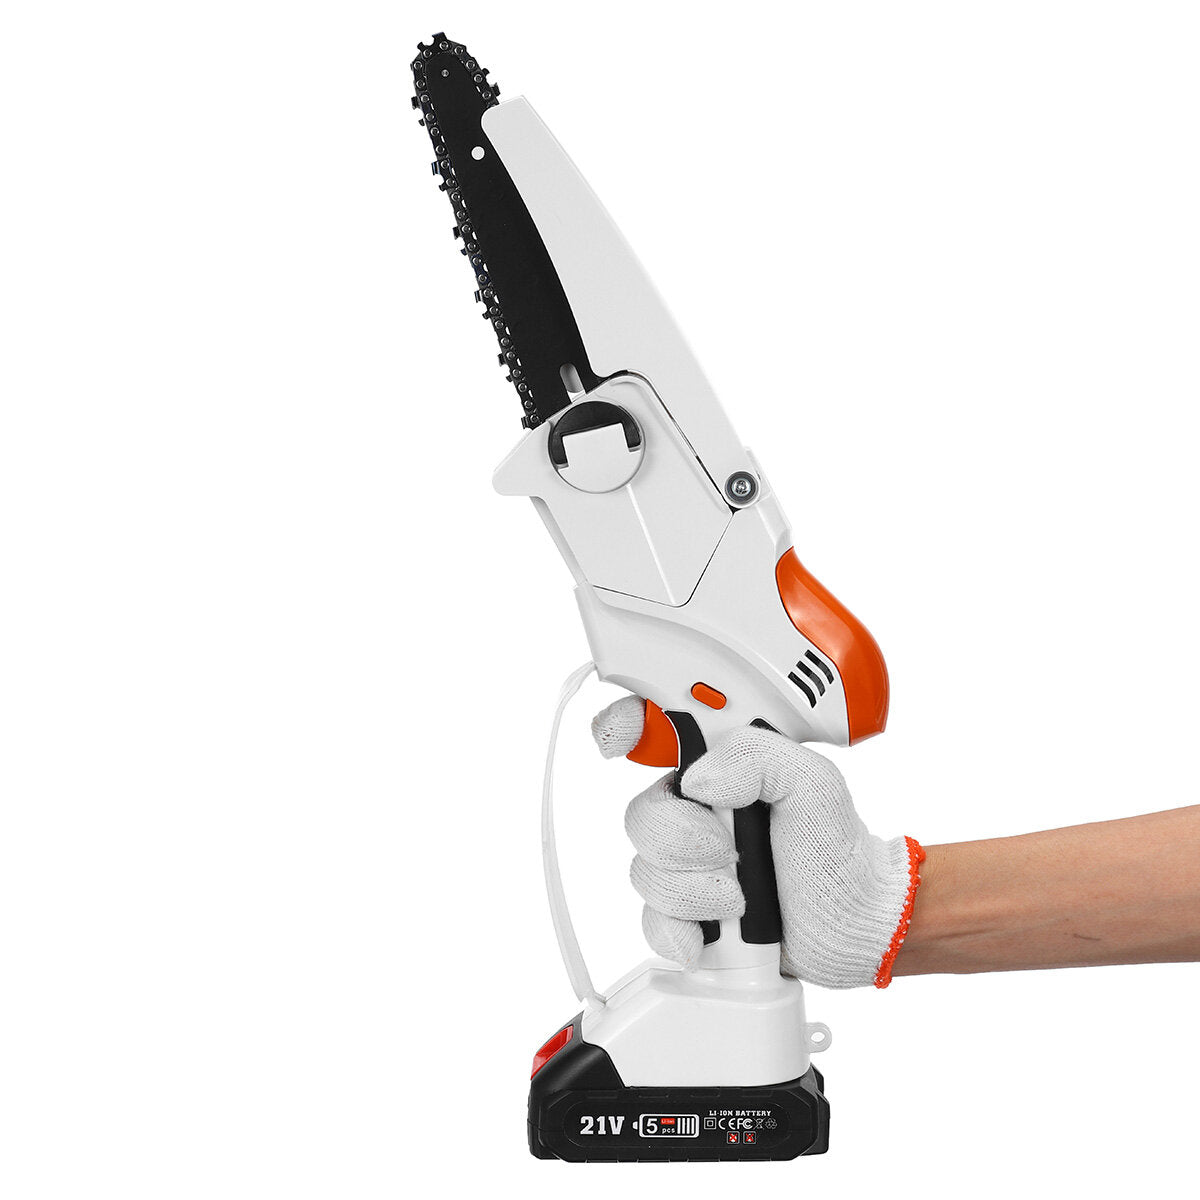 6 Inch Portable Electric Chain Saw Mini Cordless Rechargeable Woodworking Wood Cutting Tool